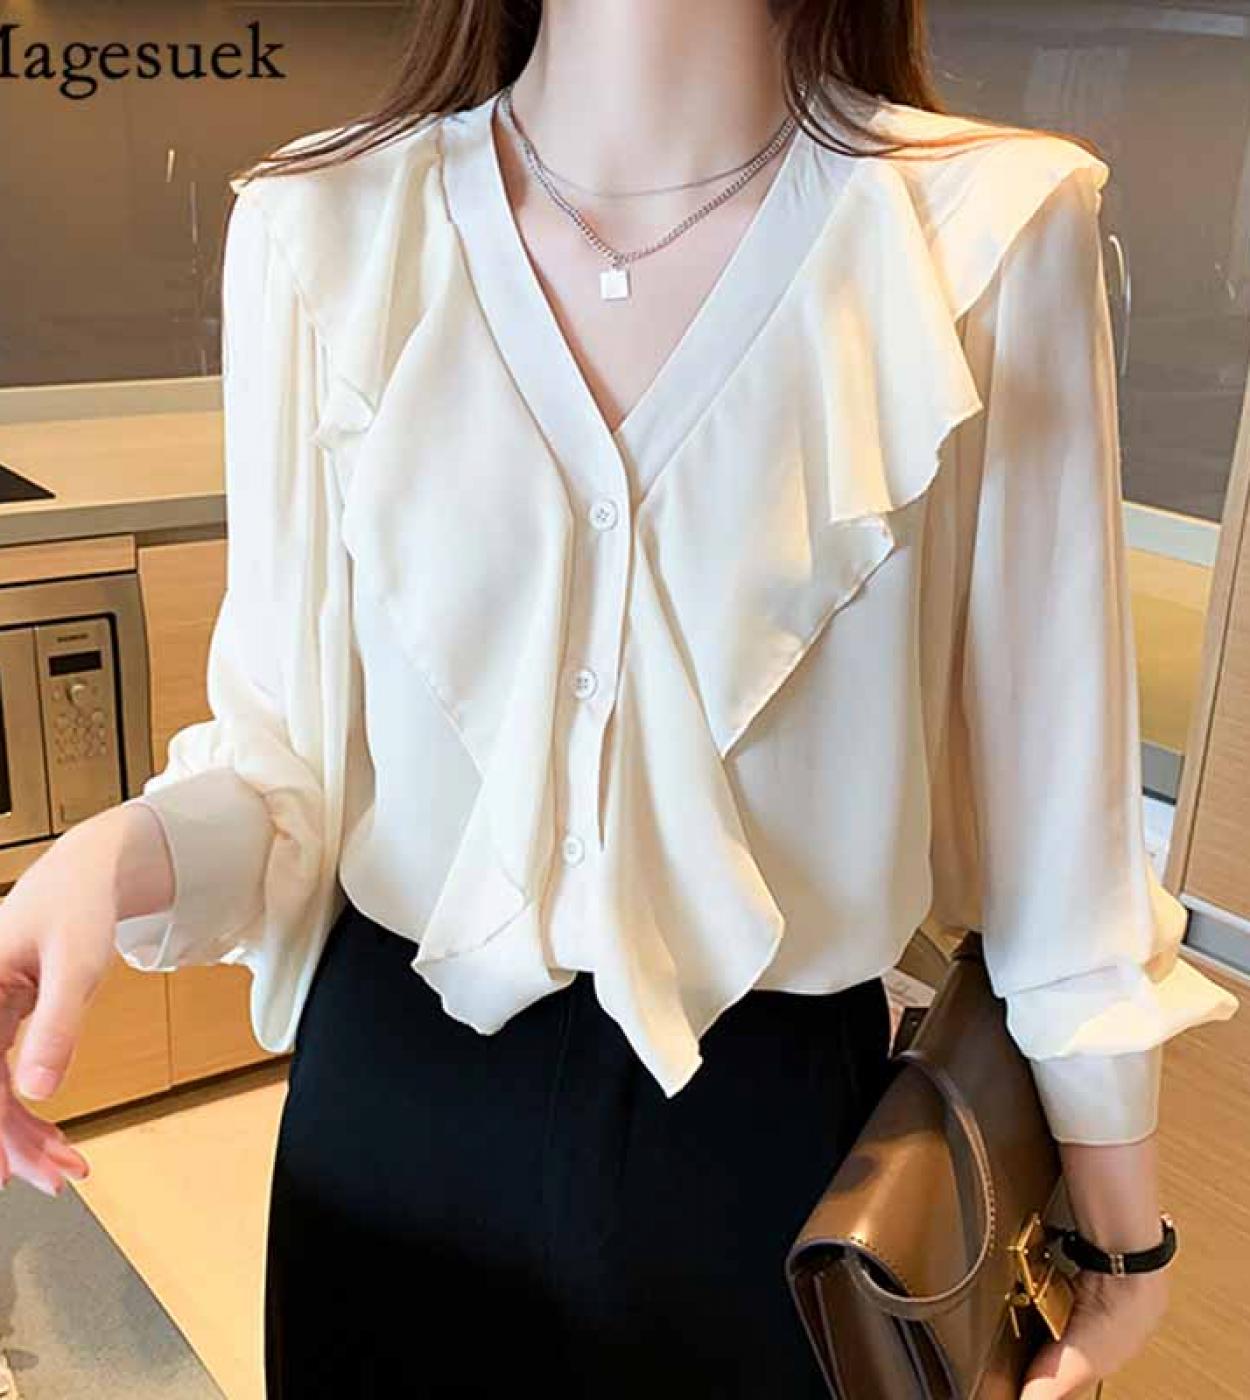 Women Long Lantern Sleeve Slim Fit Cardigan Shirts  Autumn  Style Solid Color Vneck Ruffled Blouse Blusas Mujer 11458  B